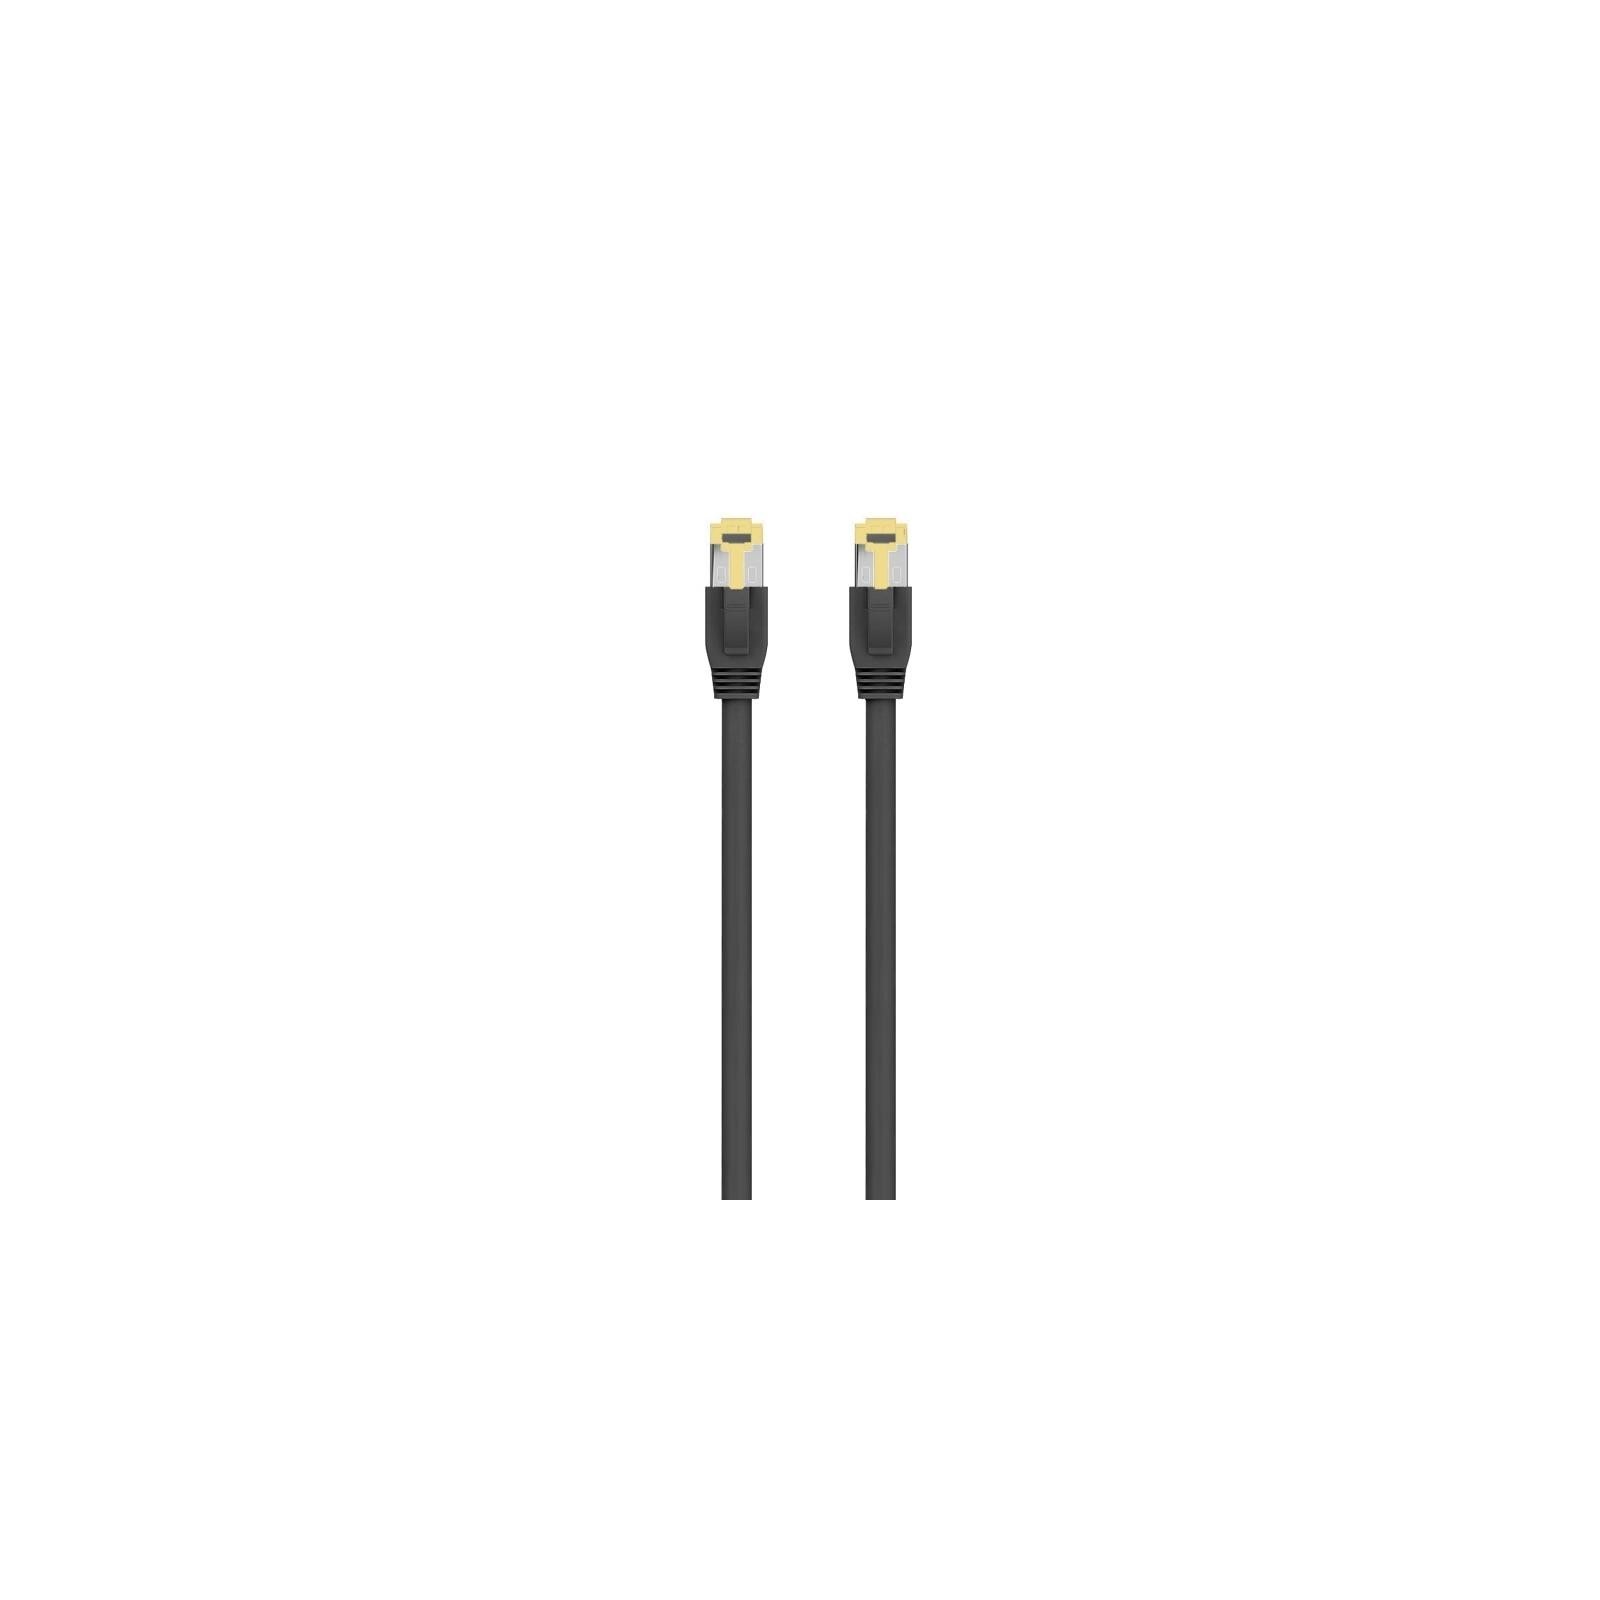 Ewent Cable Cat. 8.1 S/Ftp,Awg26/7, Cu, Lszh,5M